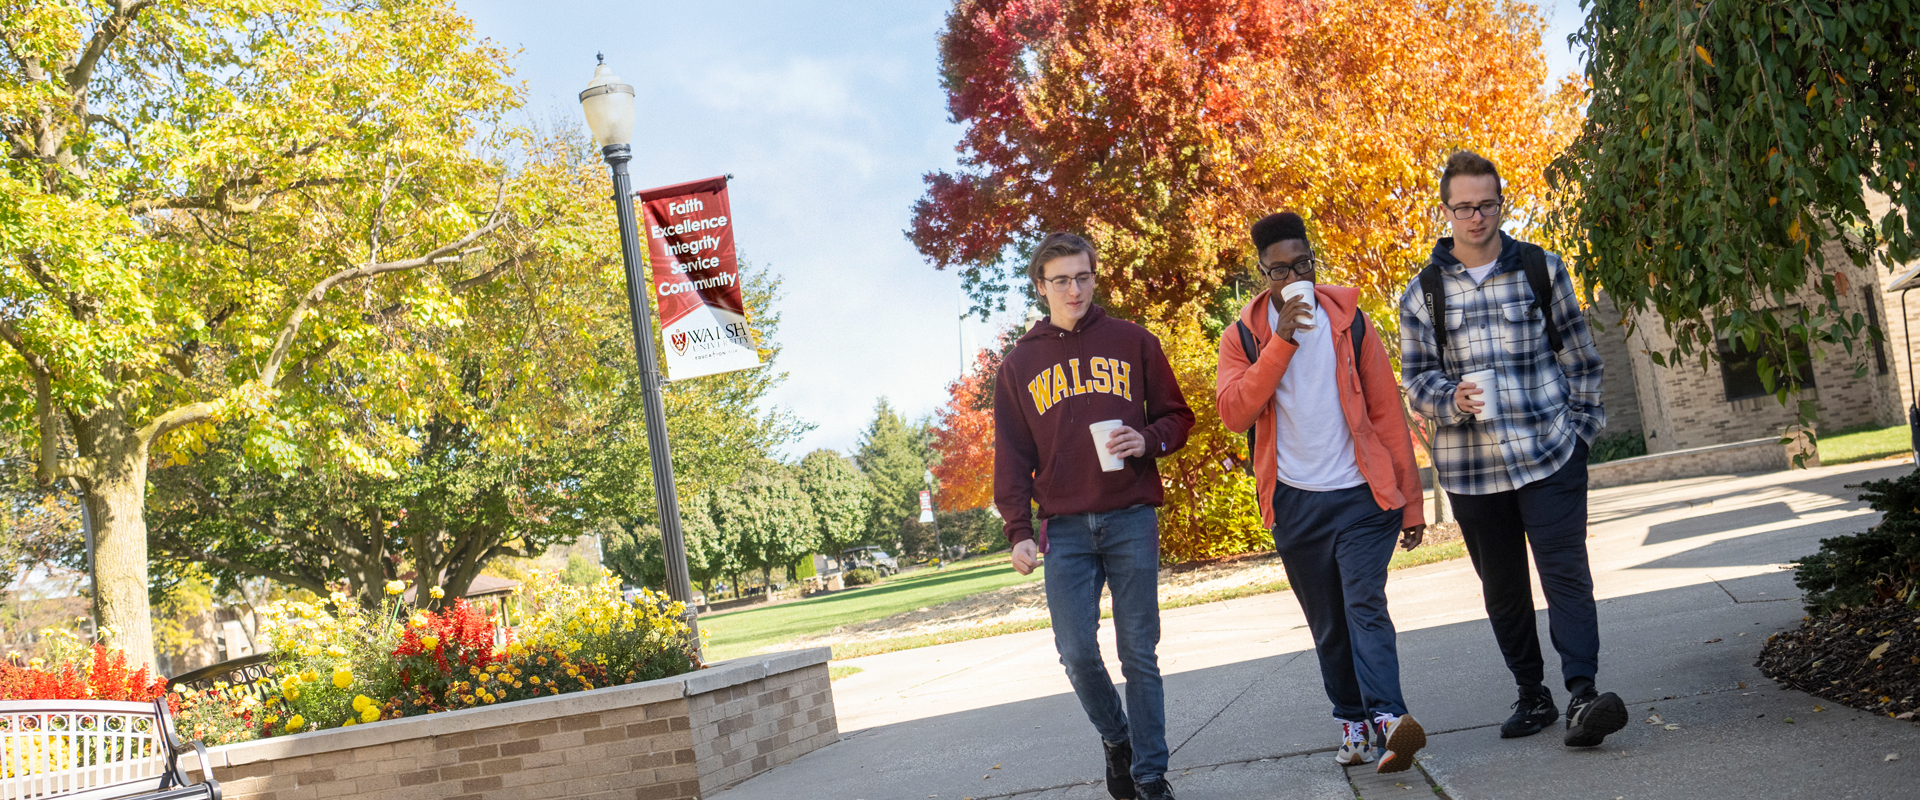 photo of three students walking together on campus in the fall